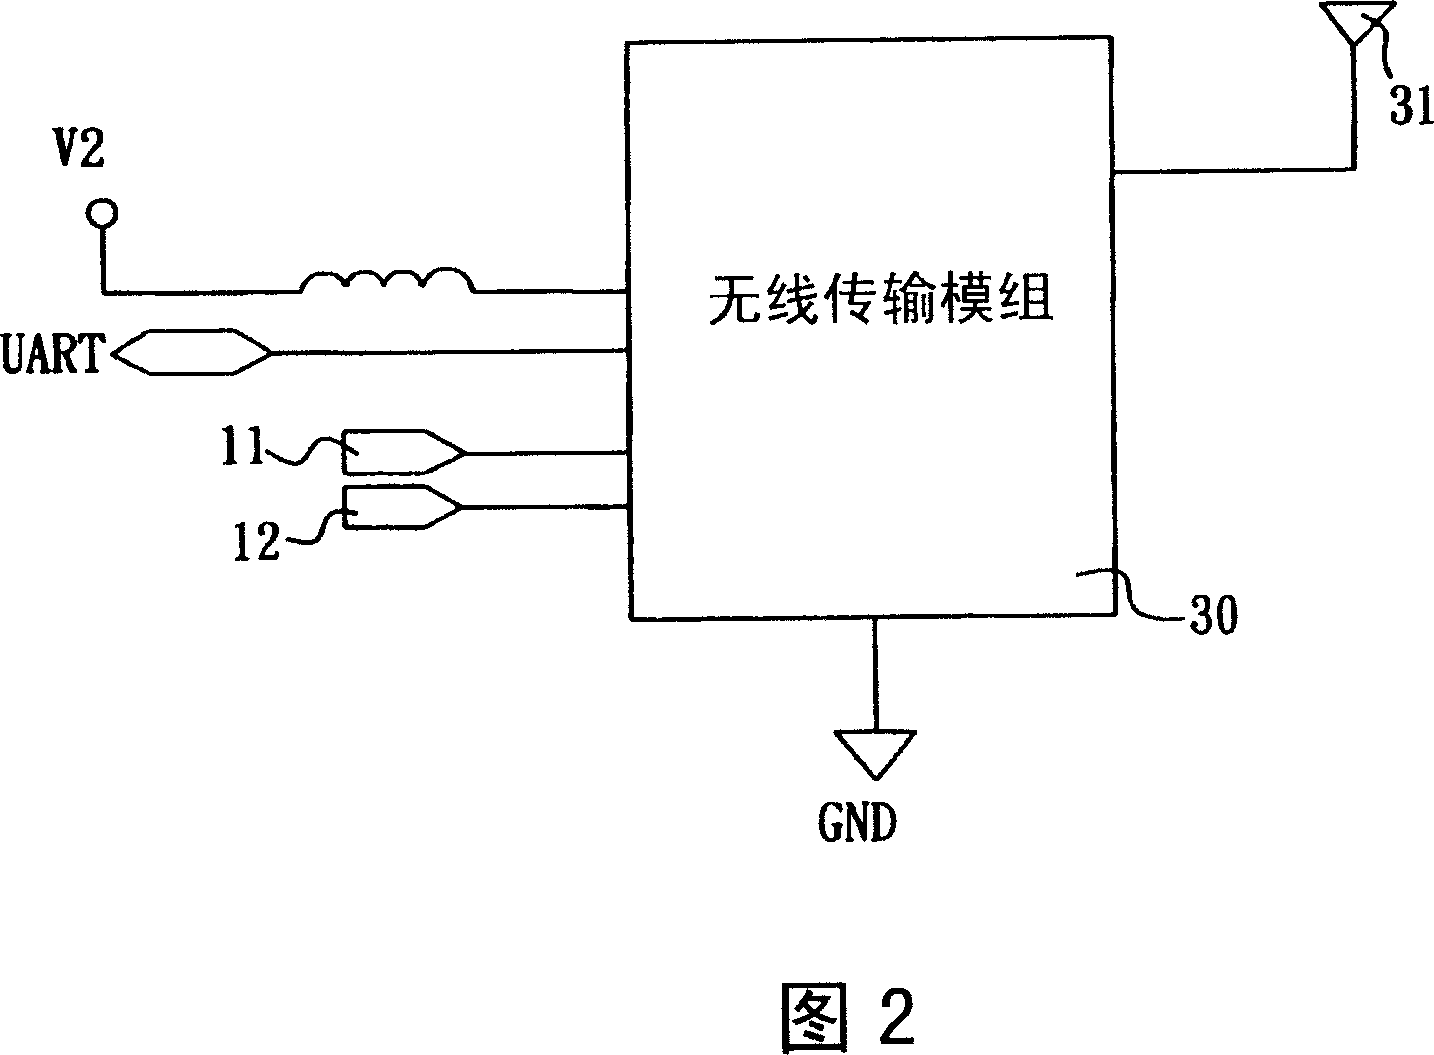 Method for controlling sound output